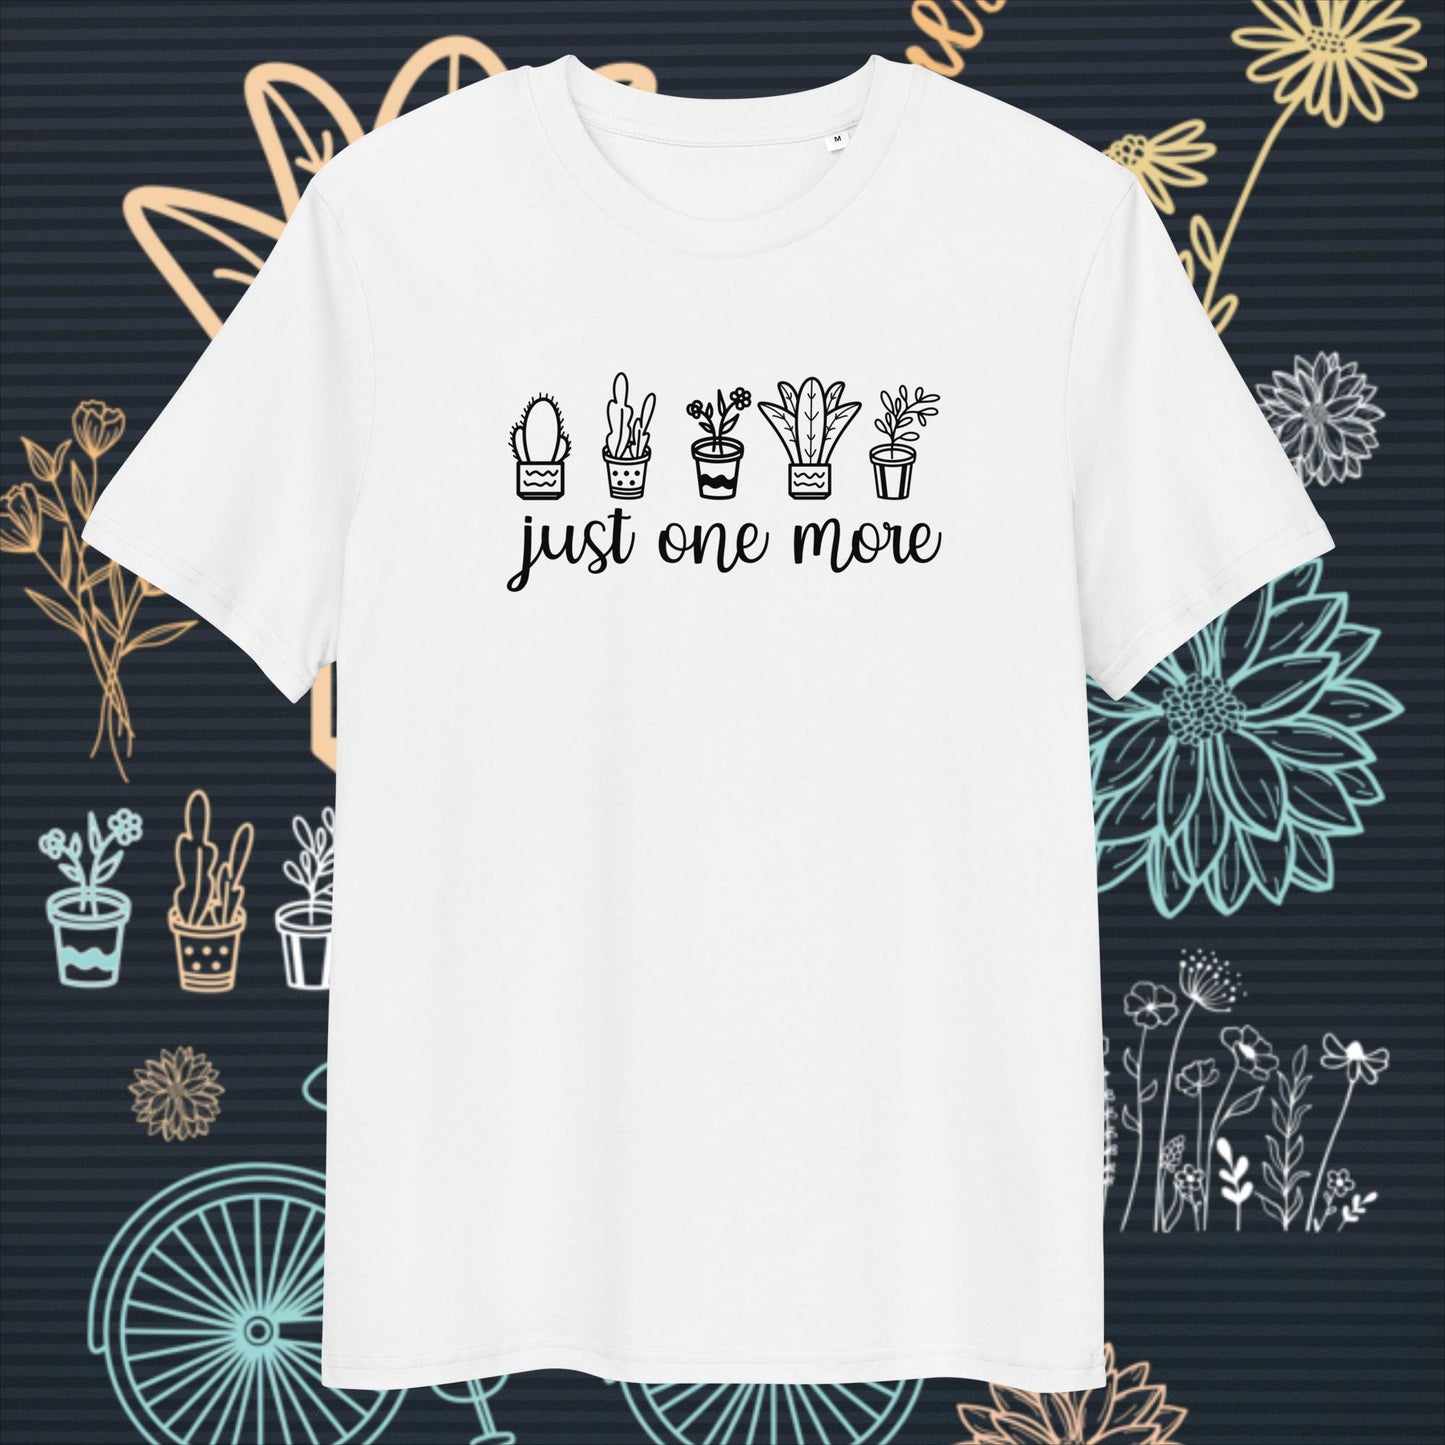 Organic cotton unisex t-shirt: Just one more